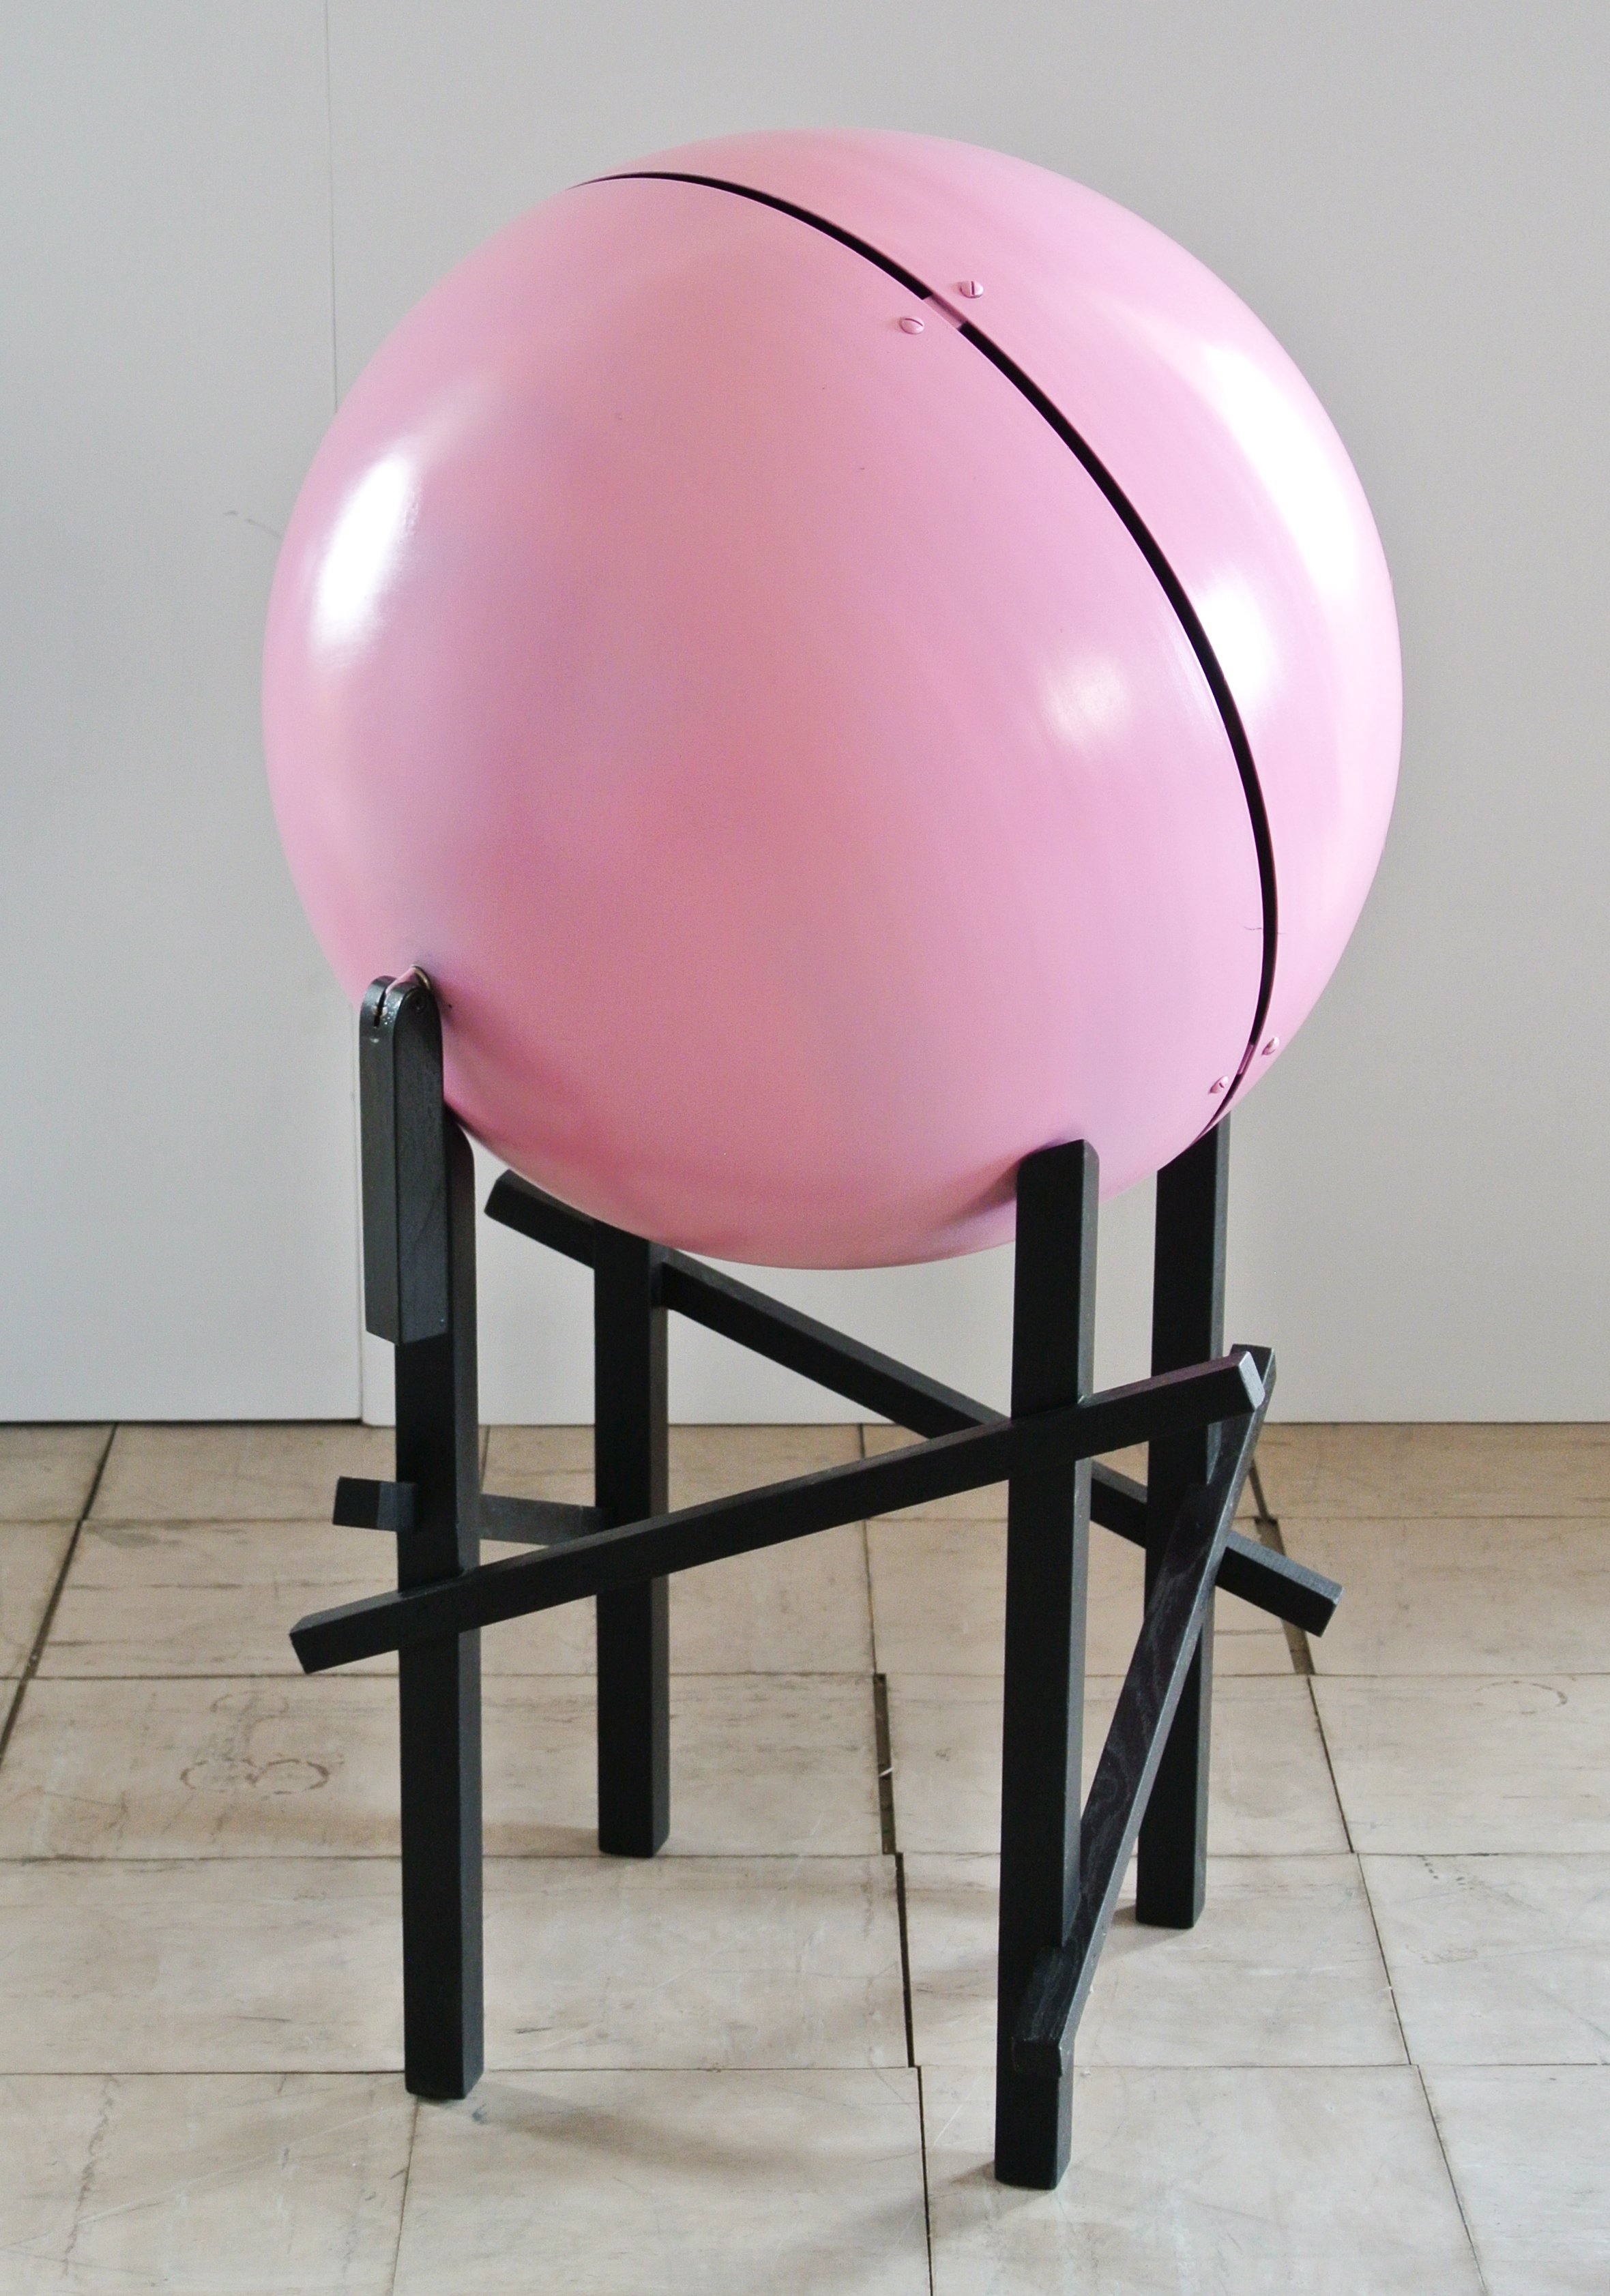 pink sphere, 2012, 02 (percussion instrument, sound from off stage).jpg